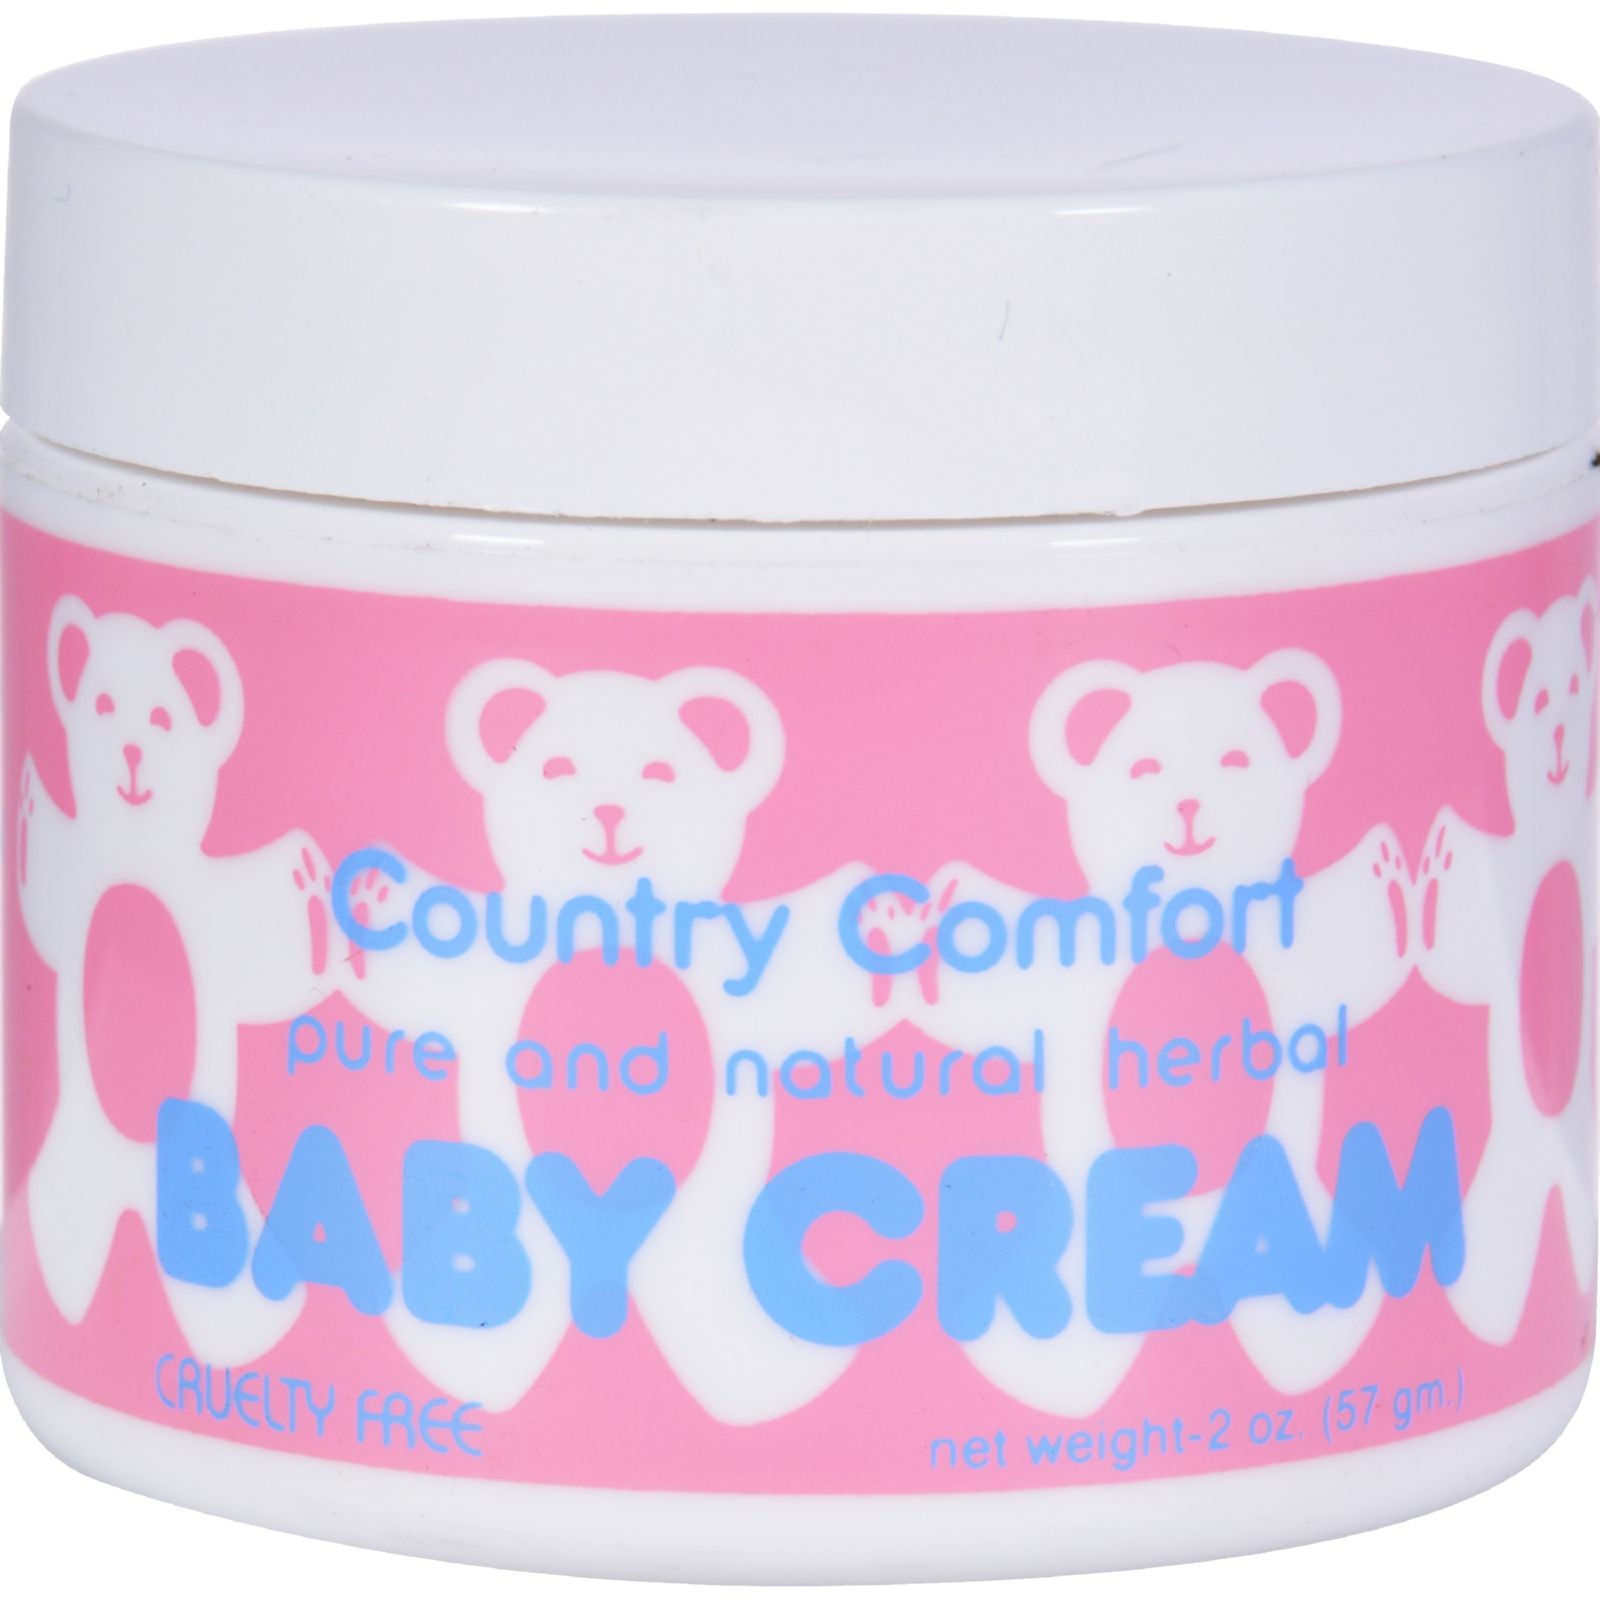 Country Comfort Baby Cream - 2 Oz | OnlyNaturals.us